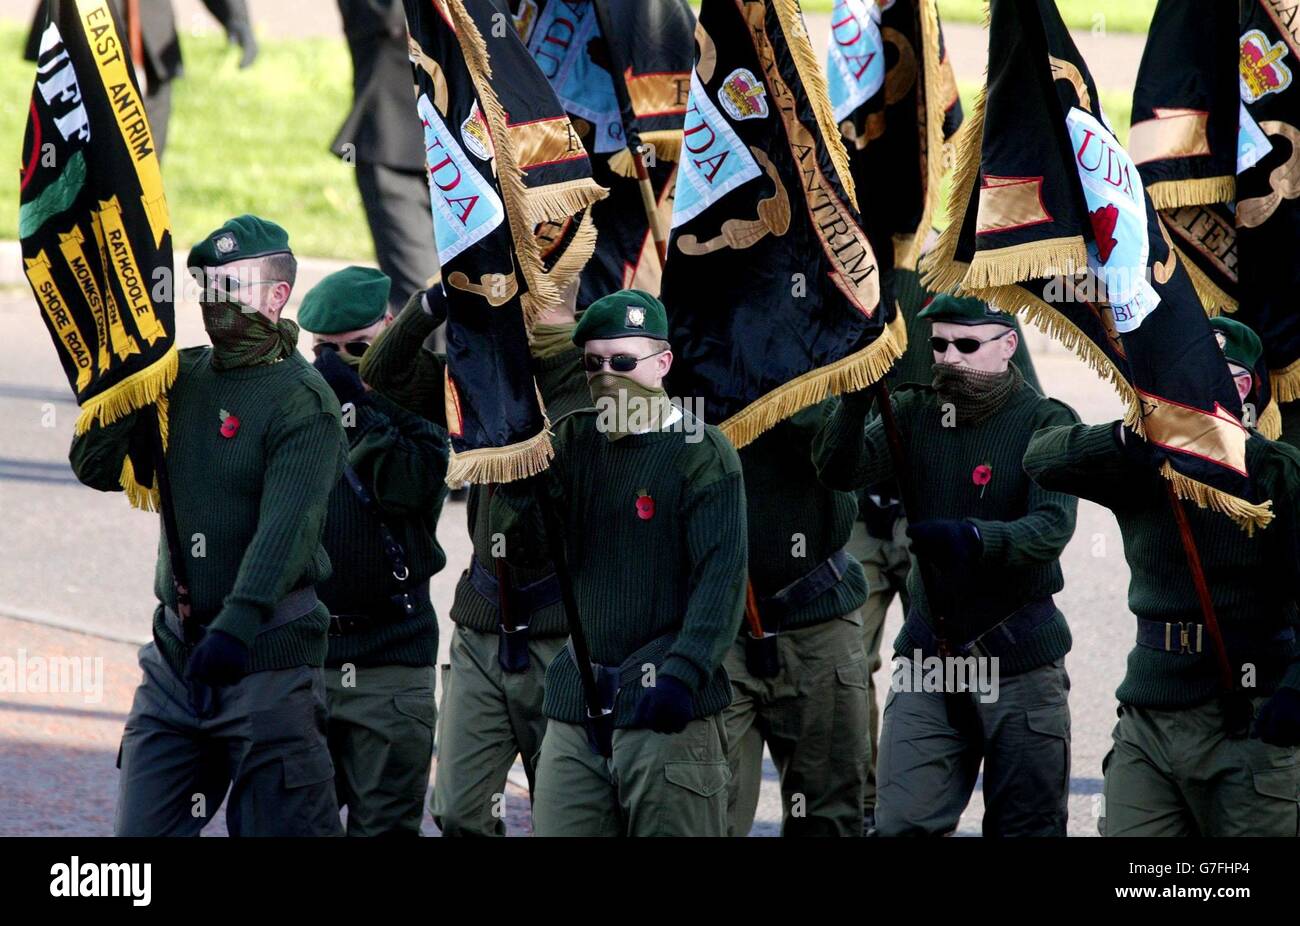 A masked Ulster Defence Association (UDA) colour party leads hundreds of its members to a Remembrance Day service in the Rathcoole estate, a loyalist stronghold on the outskirts of north Belfast. The UDA, Northern Ireland's largest loyalist paramilitary group, today pledged to end all violence and work towards complete disarmament. The announcement followed the decision of Northern Ireland Secretary Paul Murphy to recognise the UDA ceasefire. Stock Photo